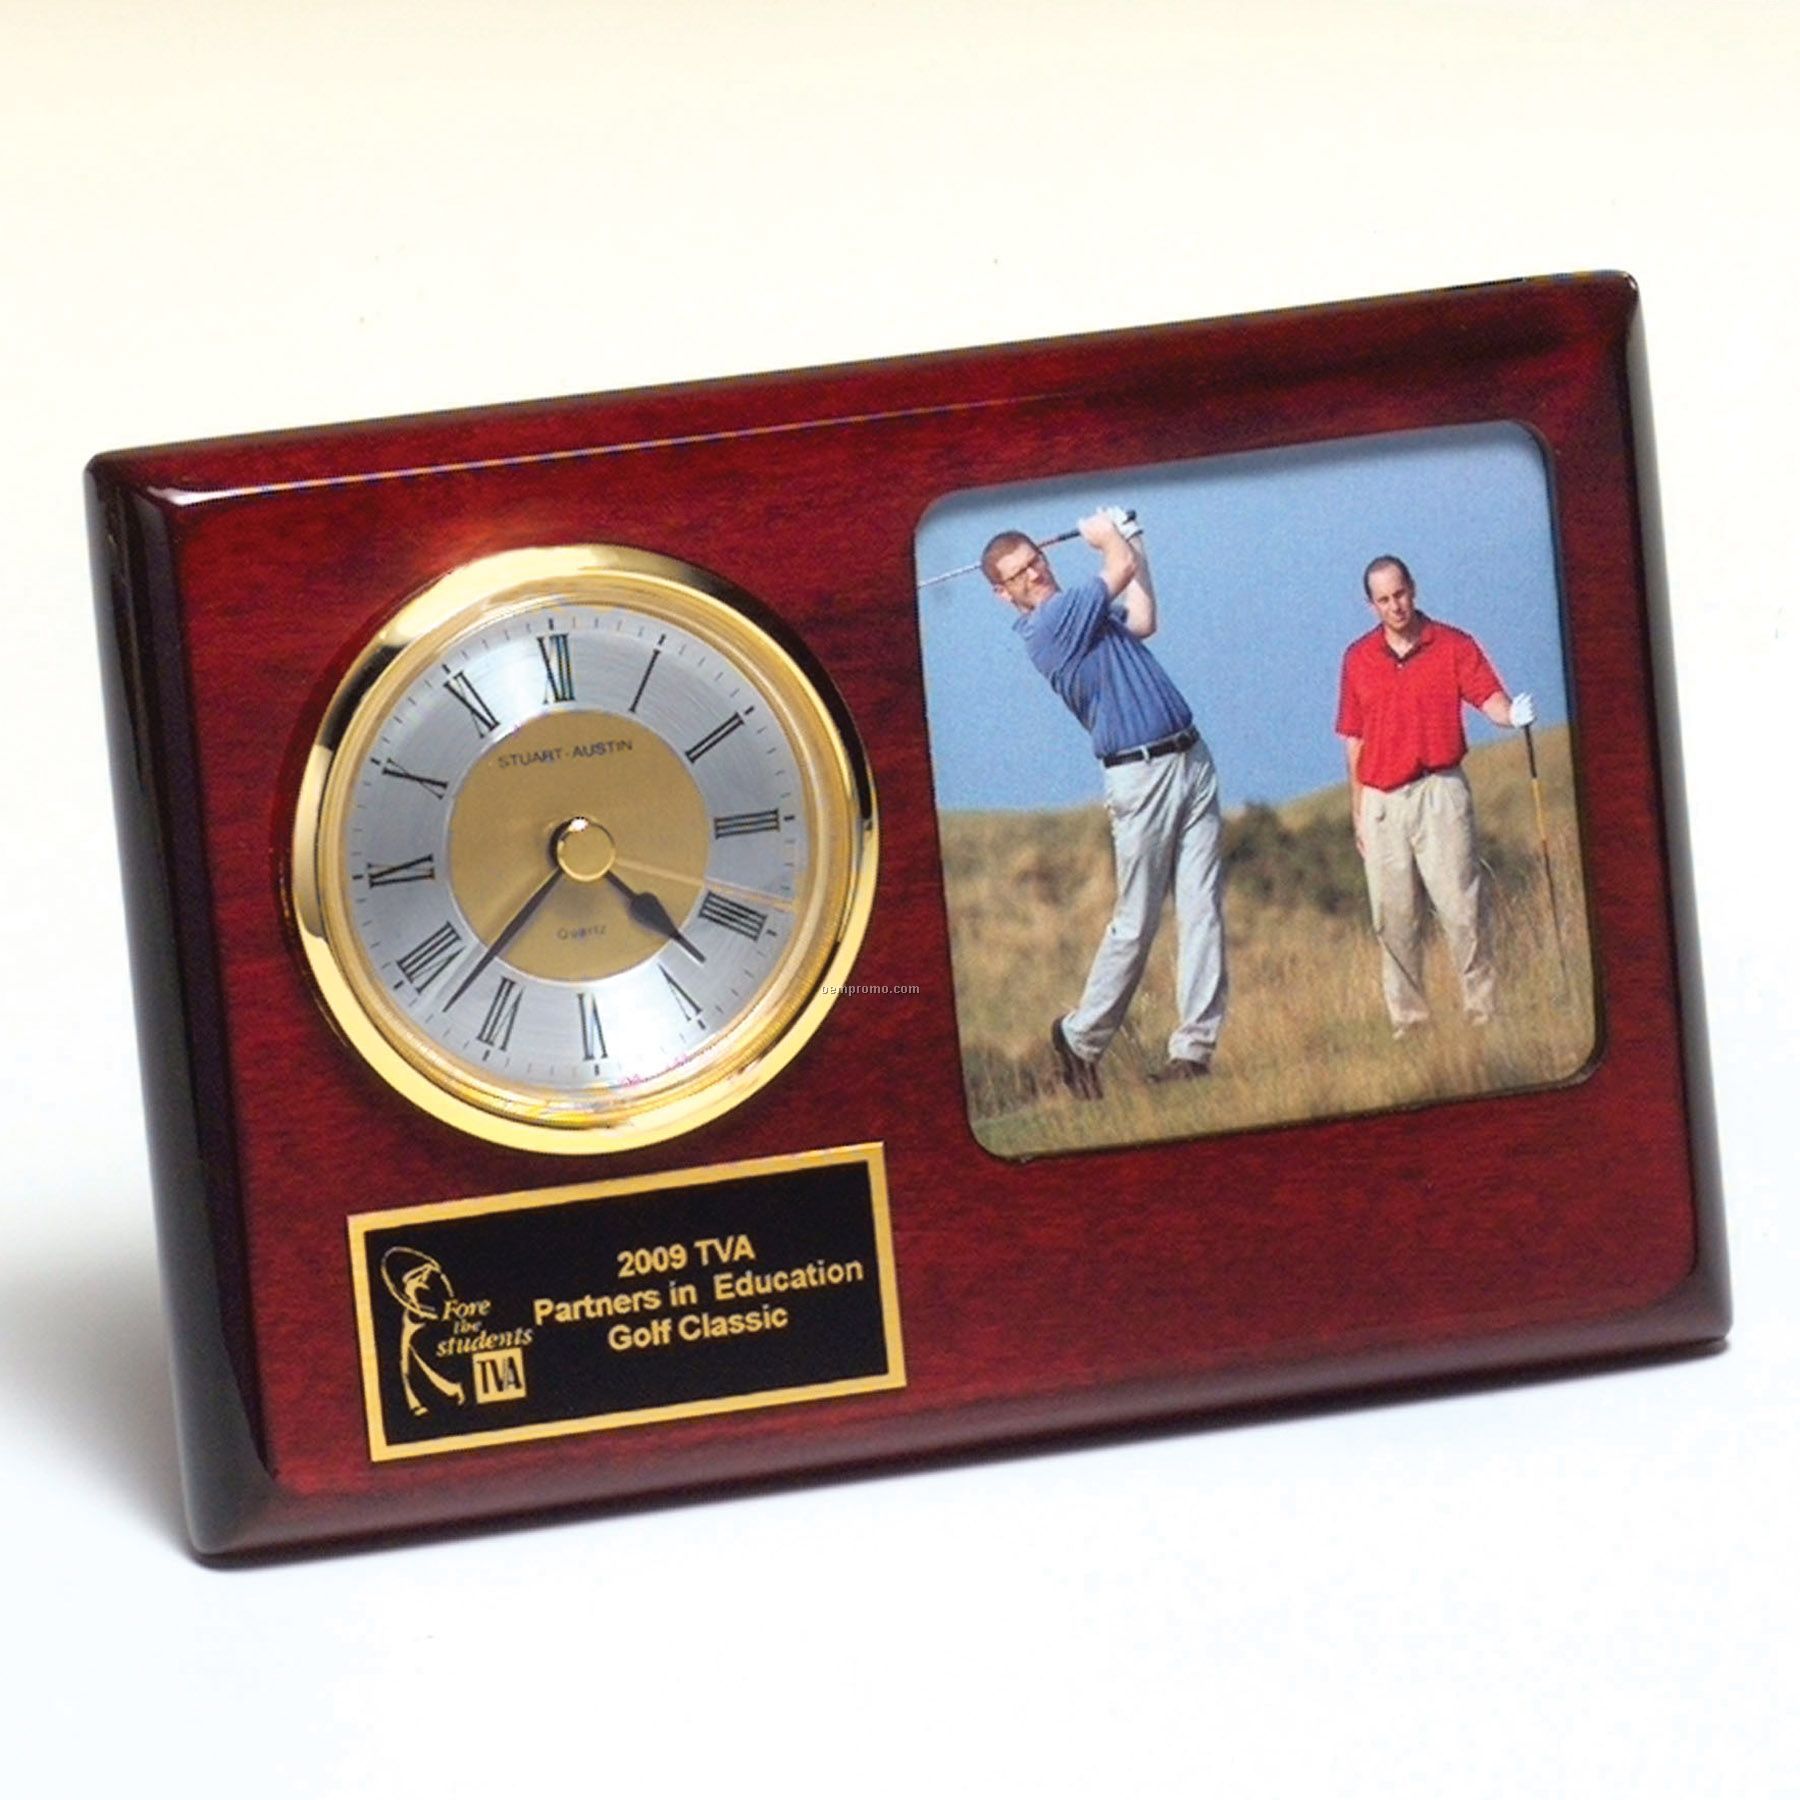 Rosewood Piano Finish Desk Clock With 3" X 3" Photo Area